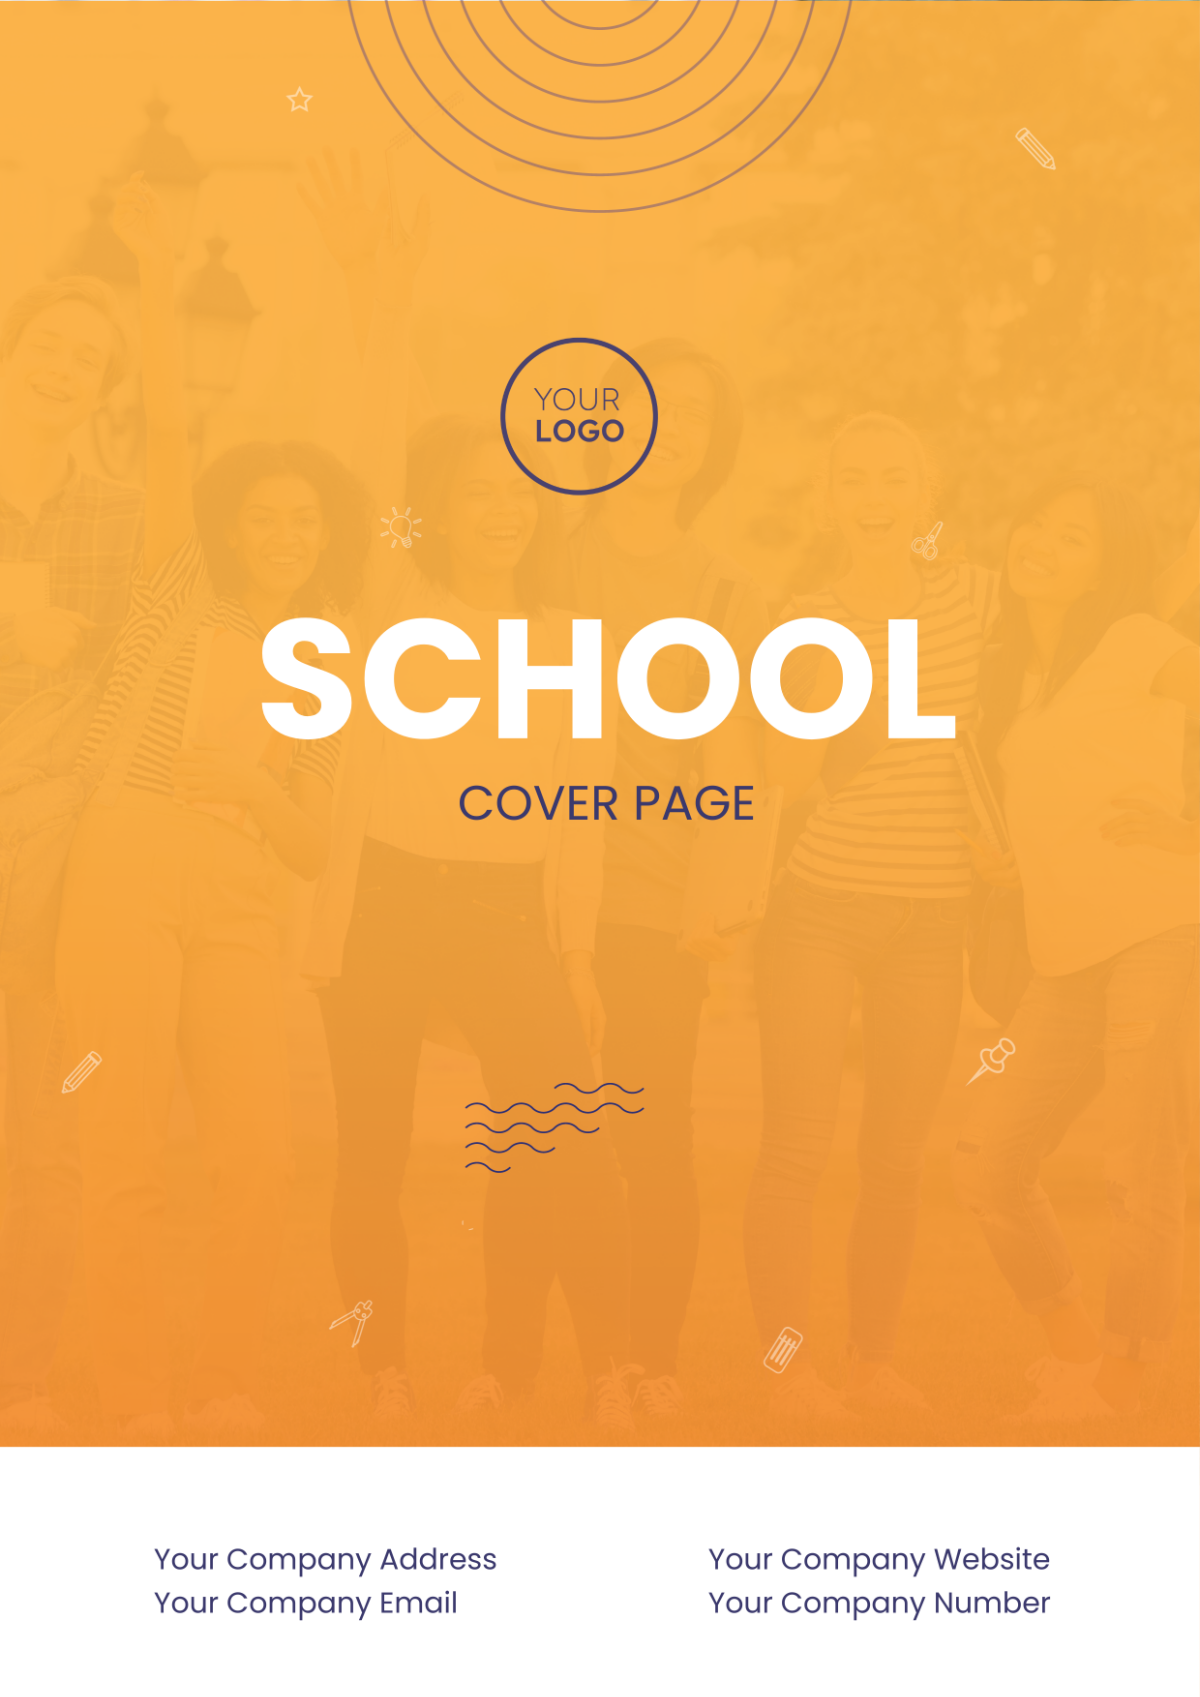 School Cover Page Logo